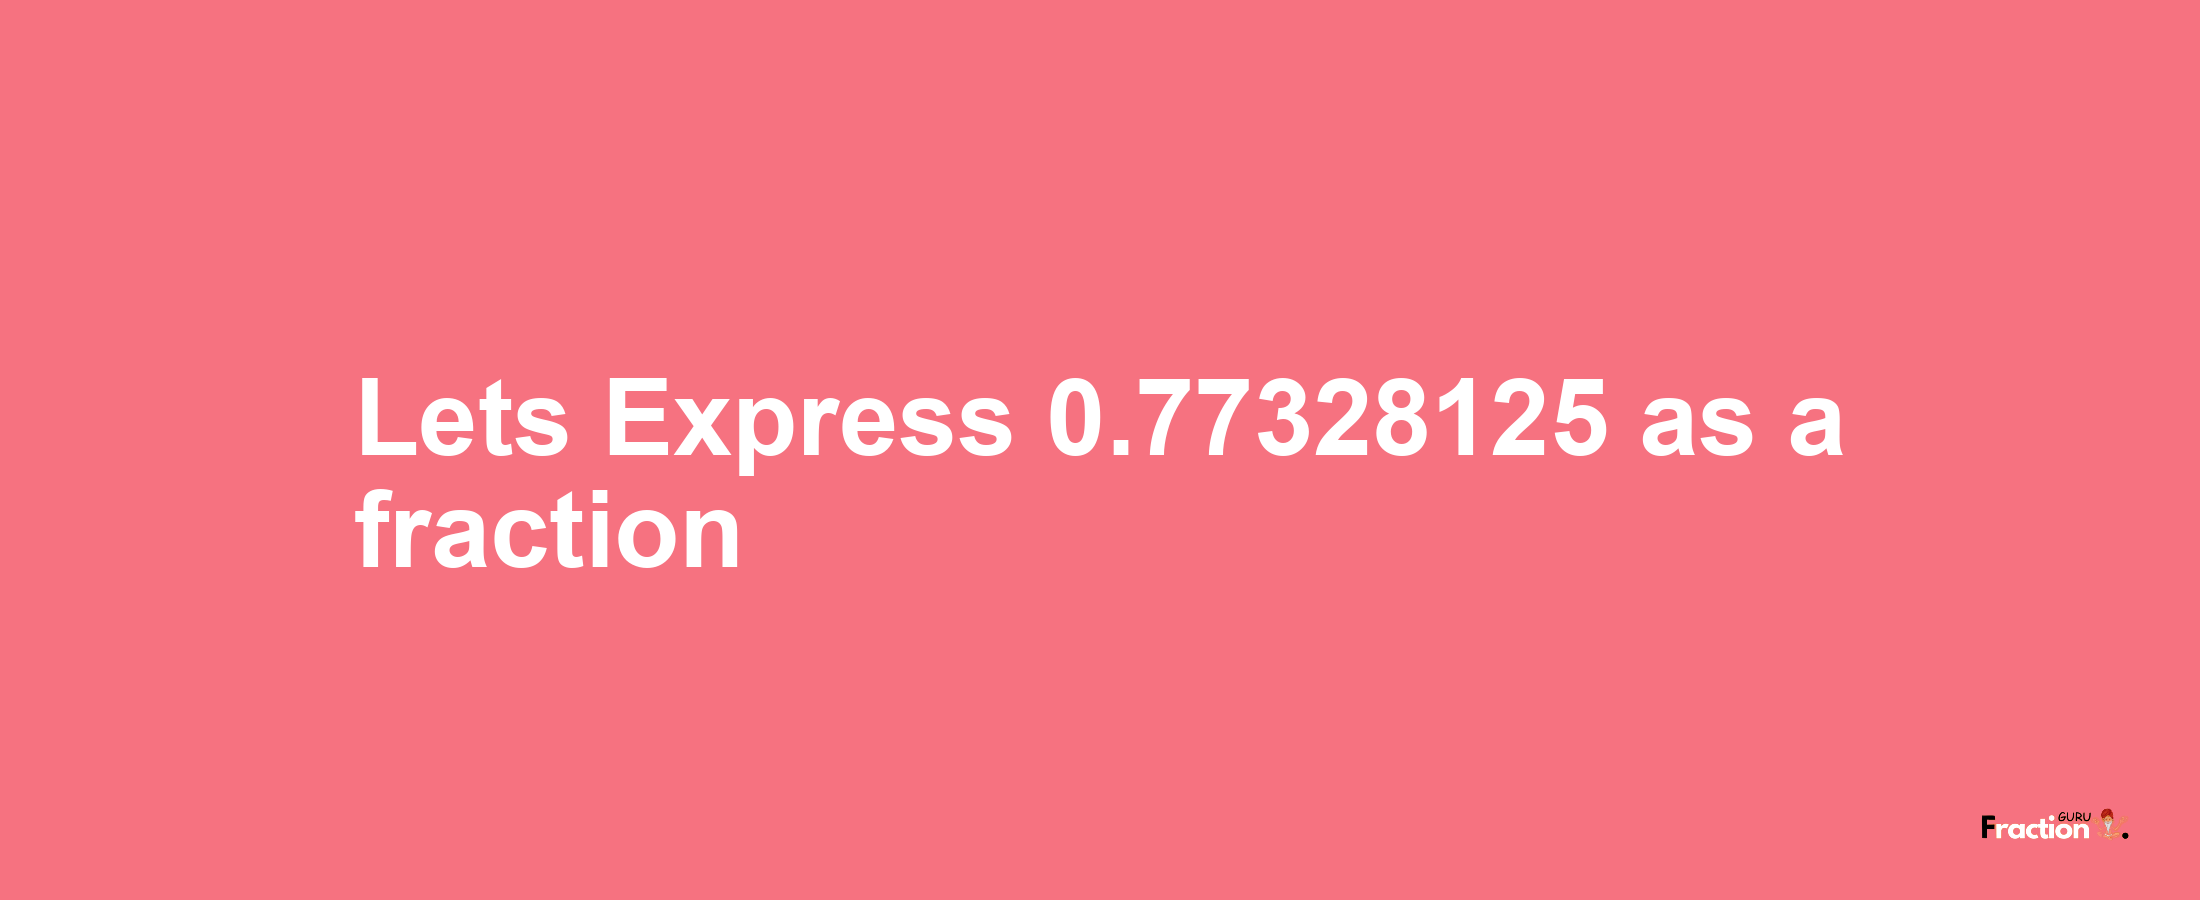 Lets Express 0.77328125 as afraction